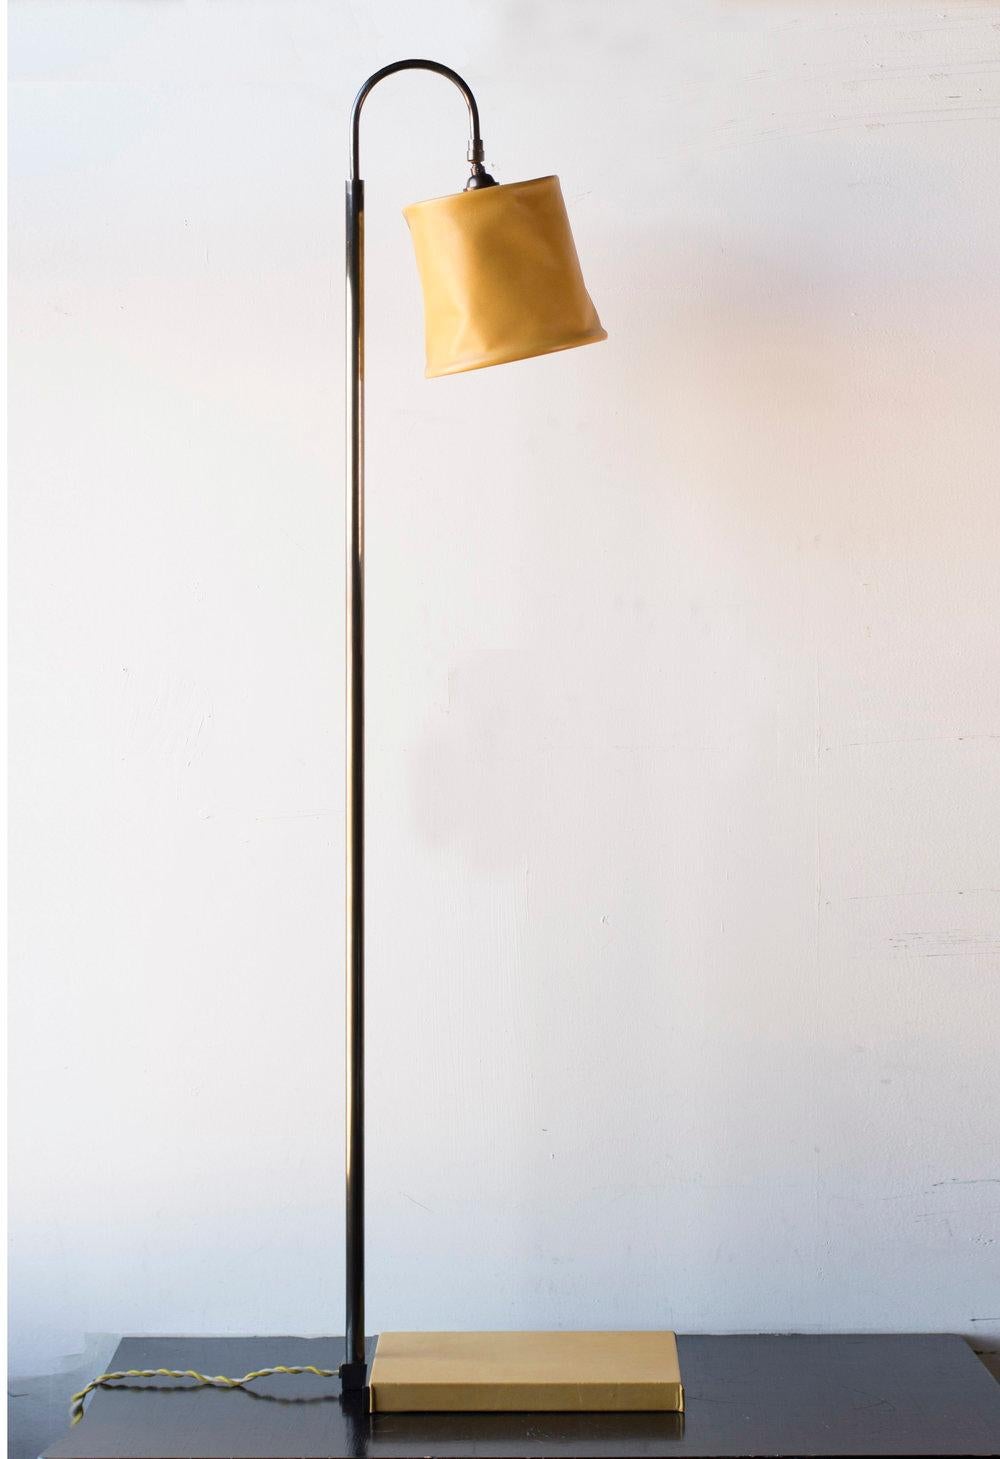 Series01 Floor Lamp, Hand-Dyed Lead Gray Leather, Dark Patinated Brass In New Condition For Sale In Ozone Park, NY